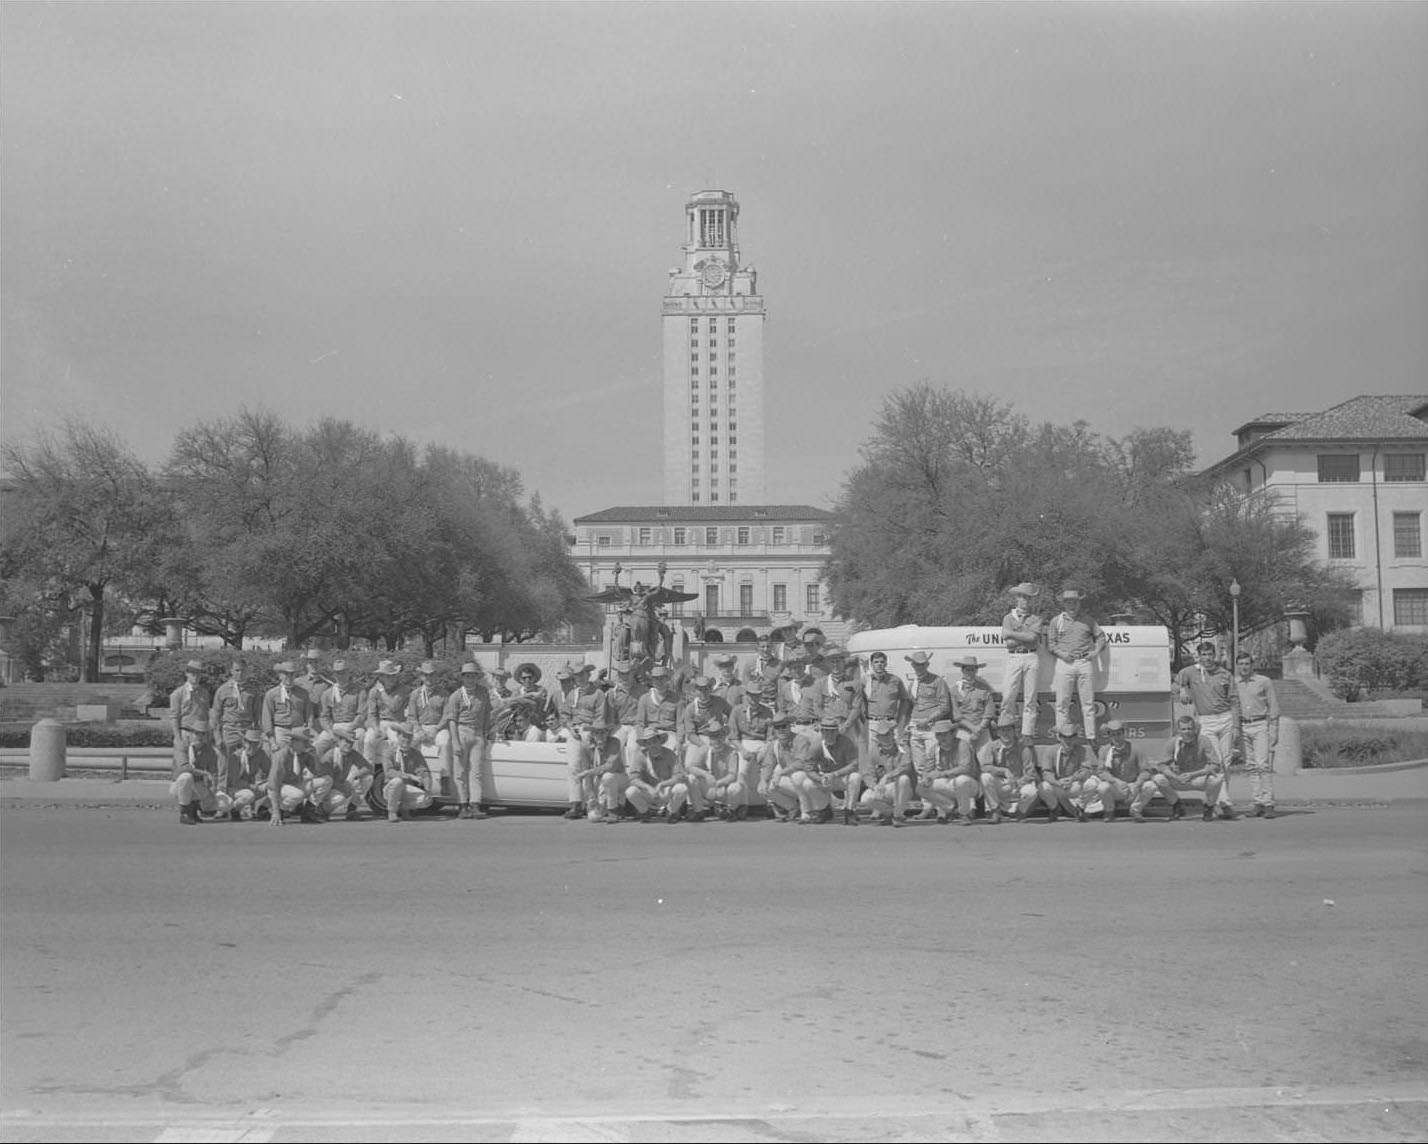 UT Silver Spurs group poses in front of Littlefield Fountain and UT Tower, 1965